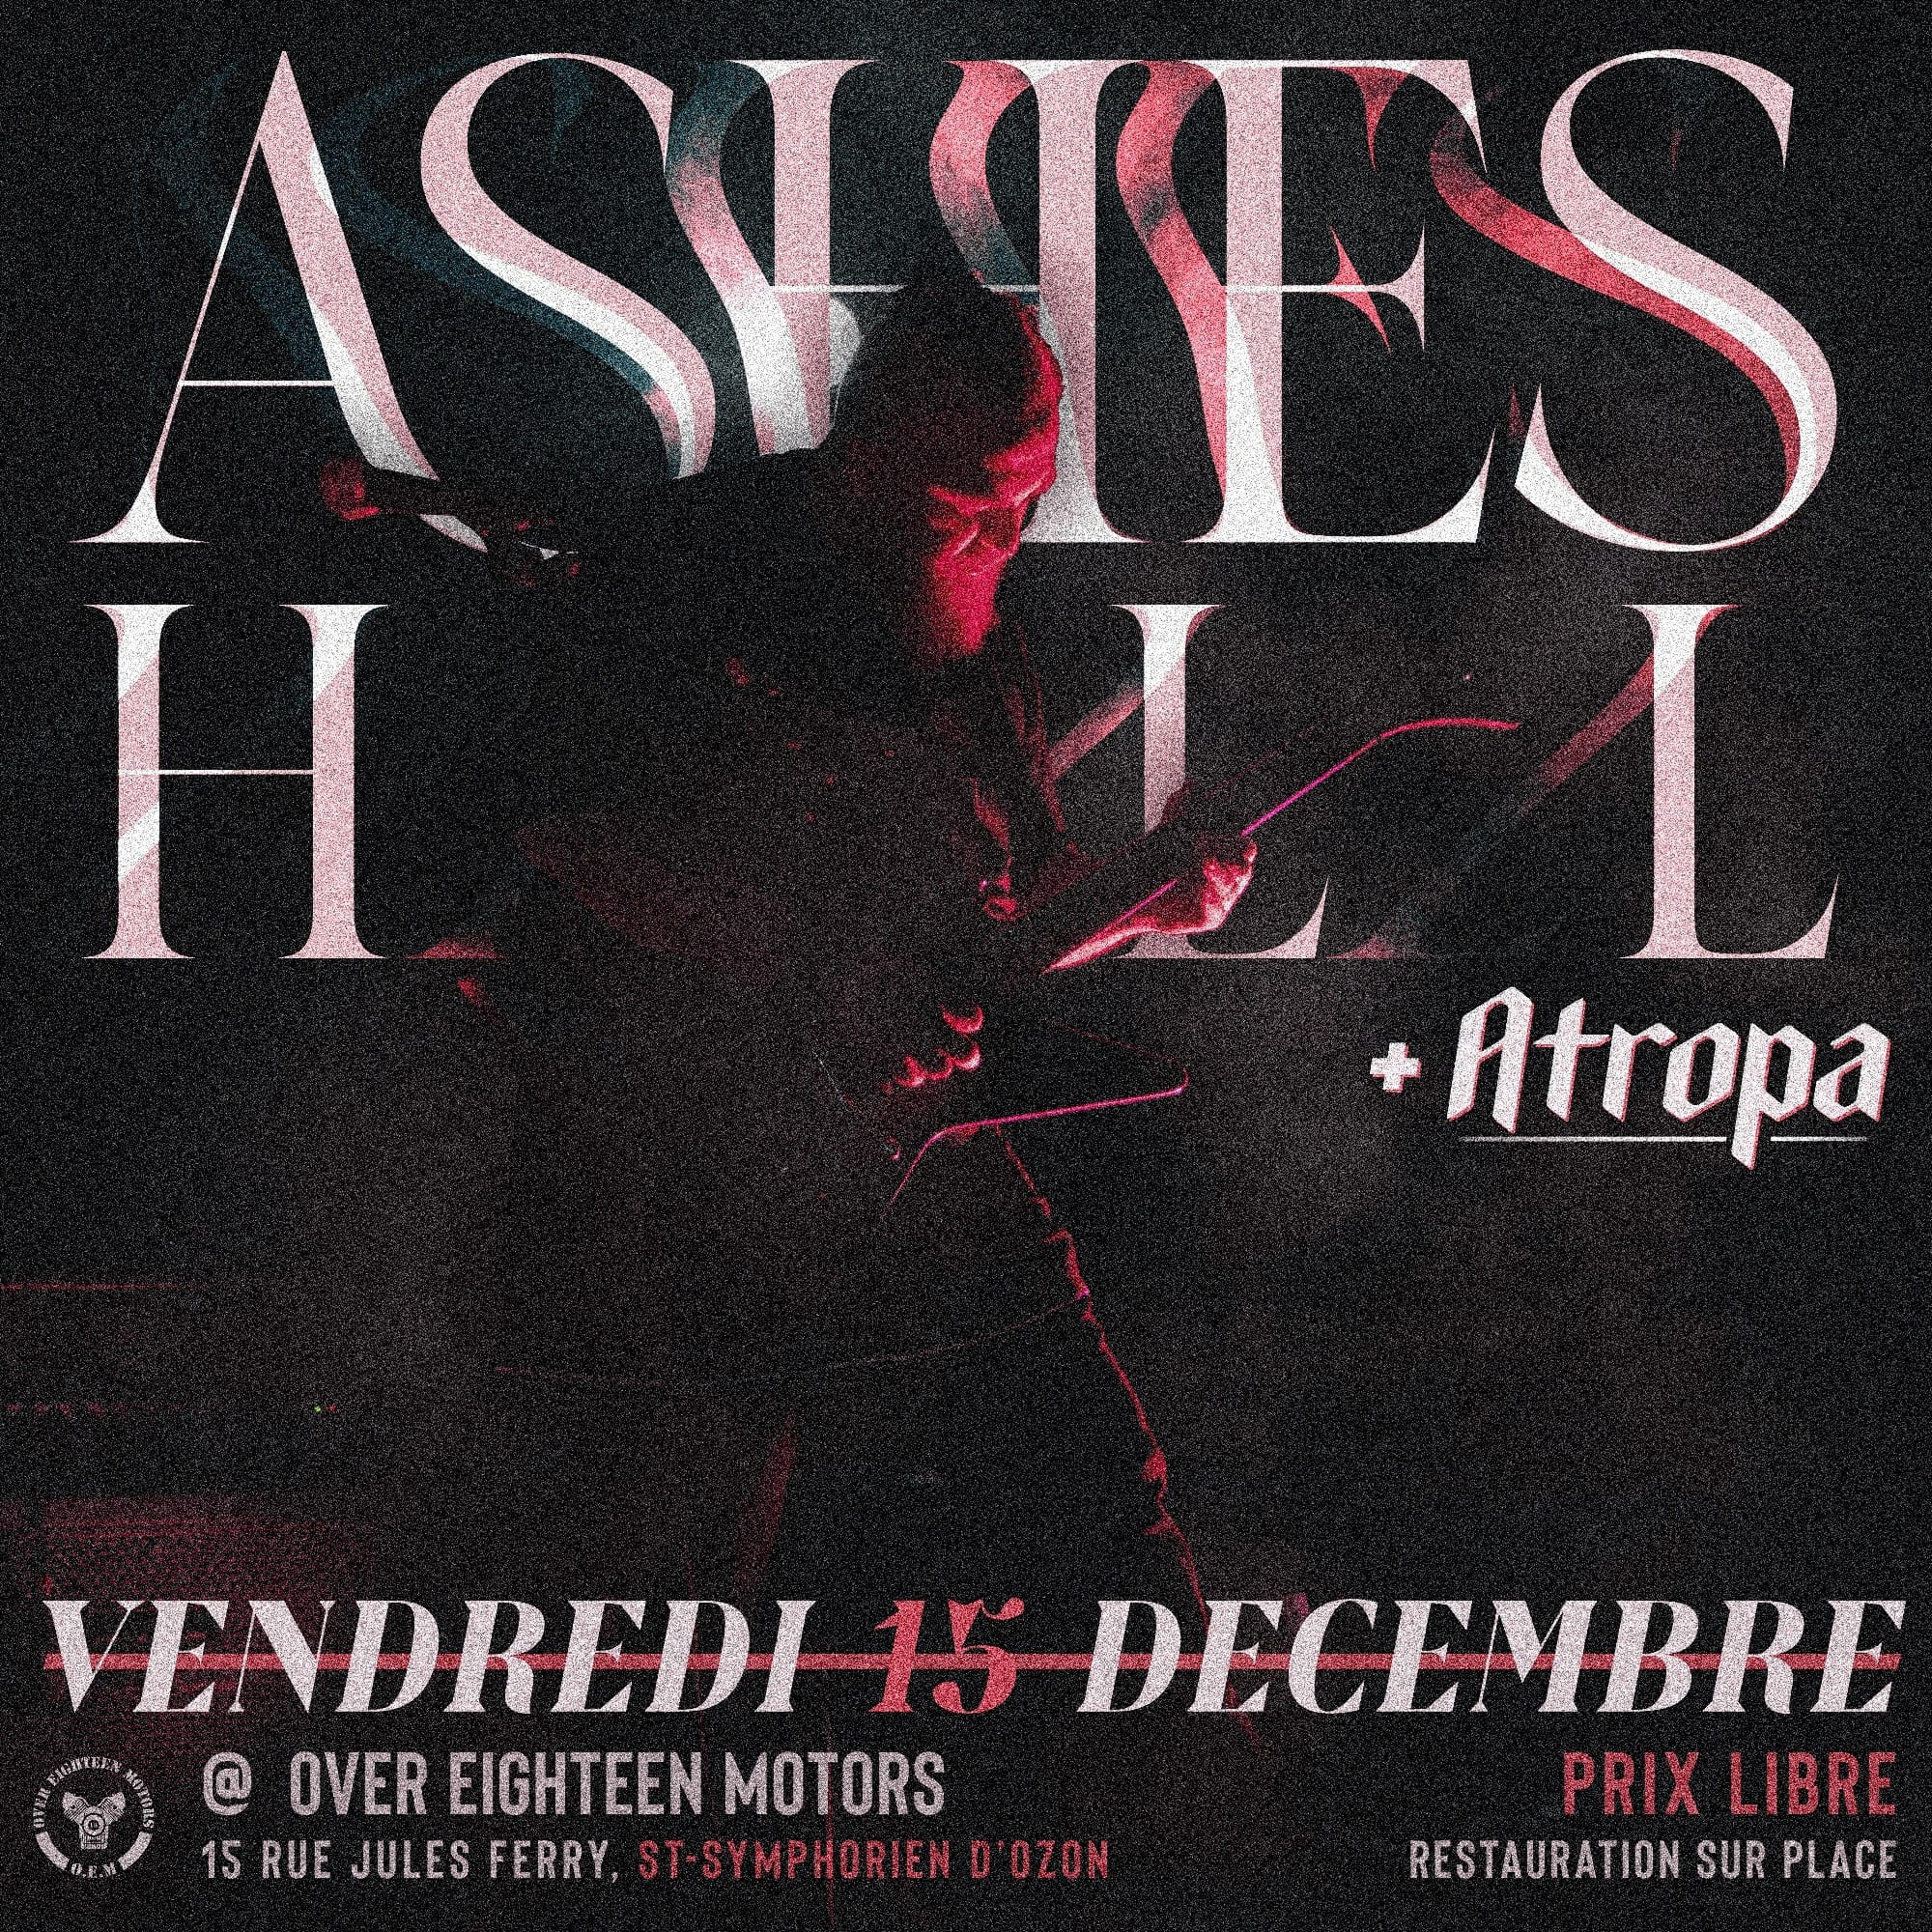 Concert Ashes Hill + Atropa